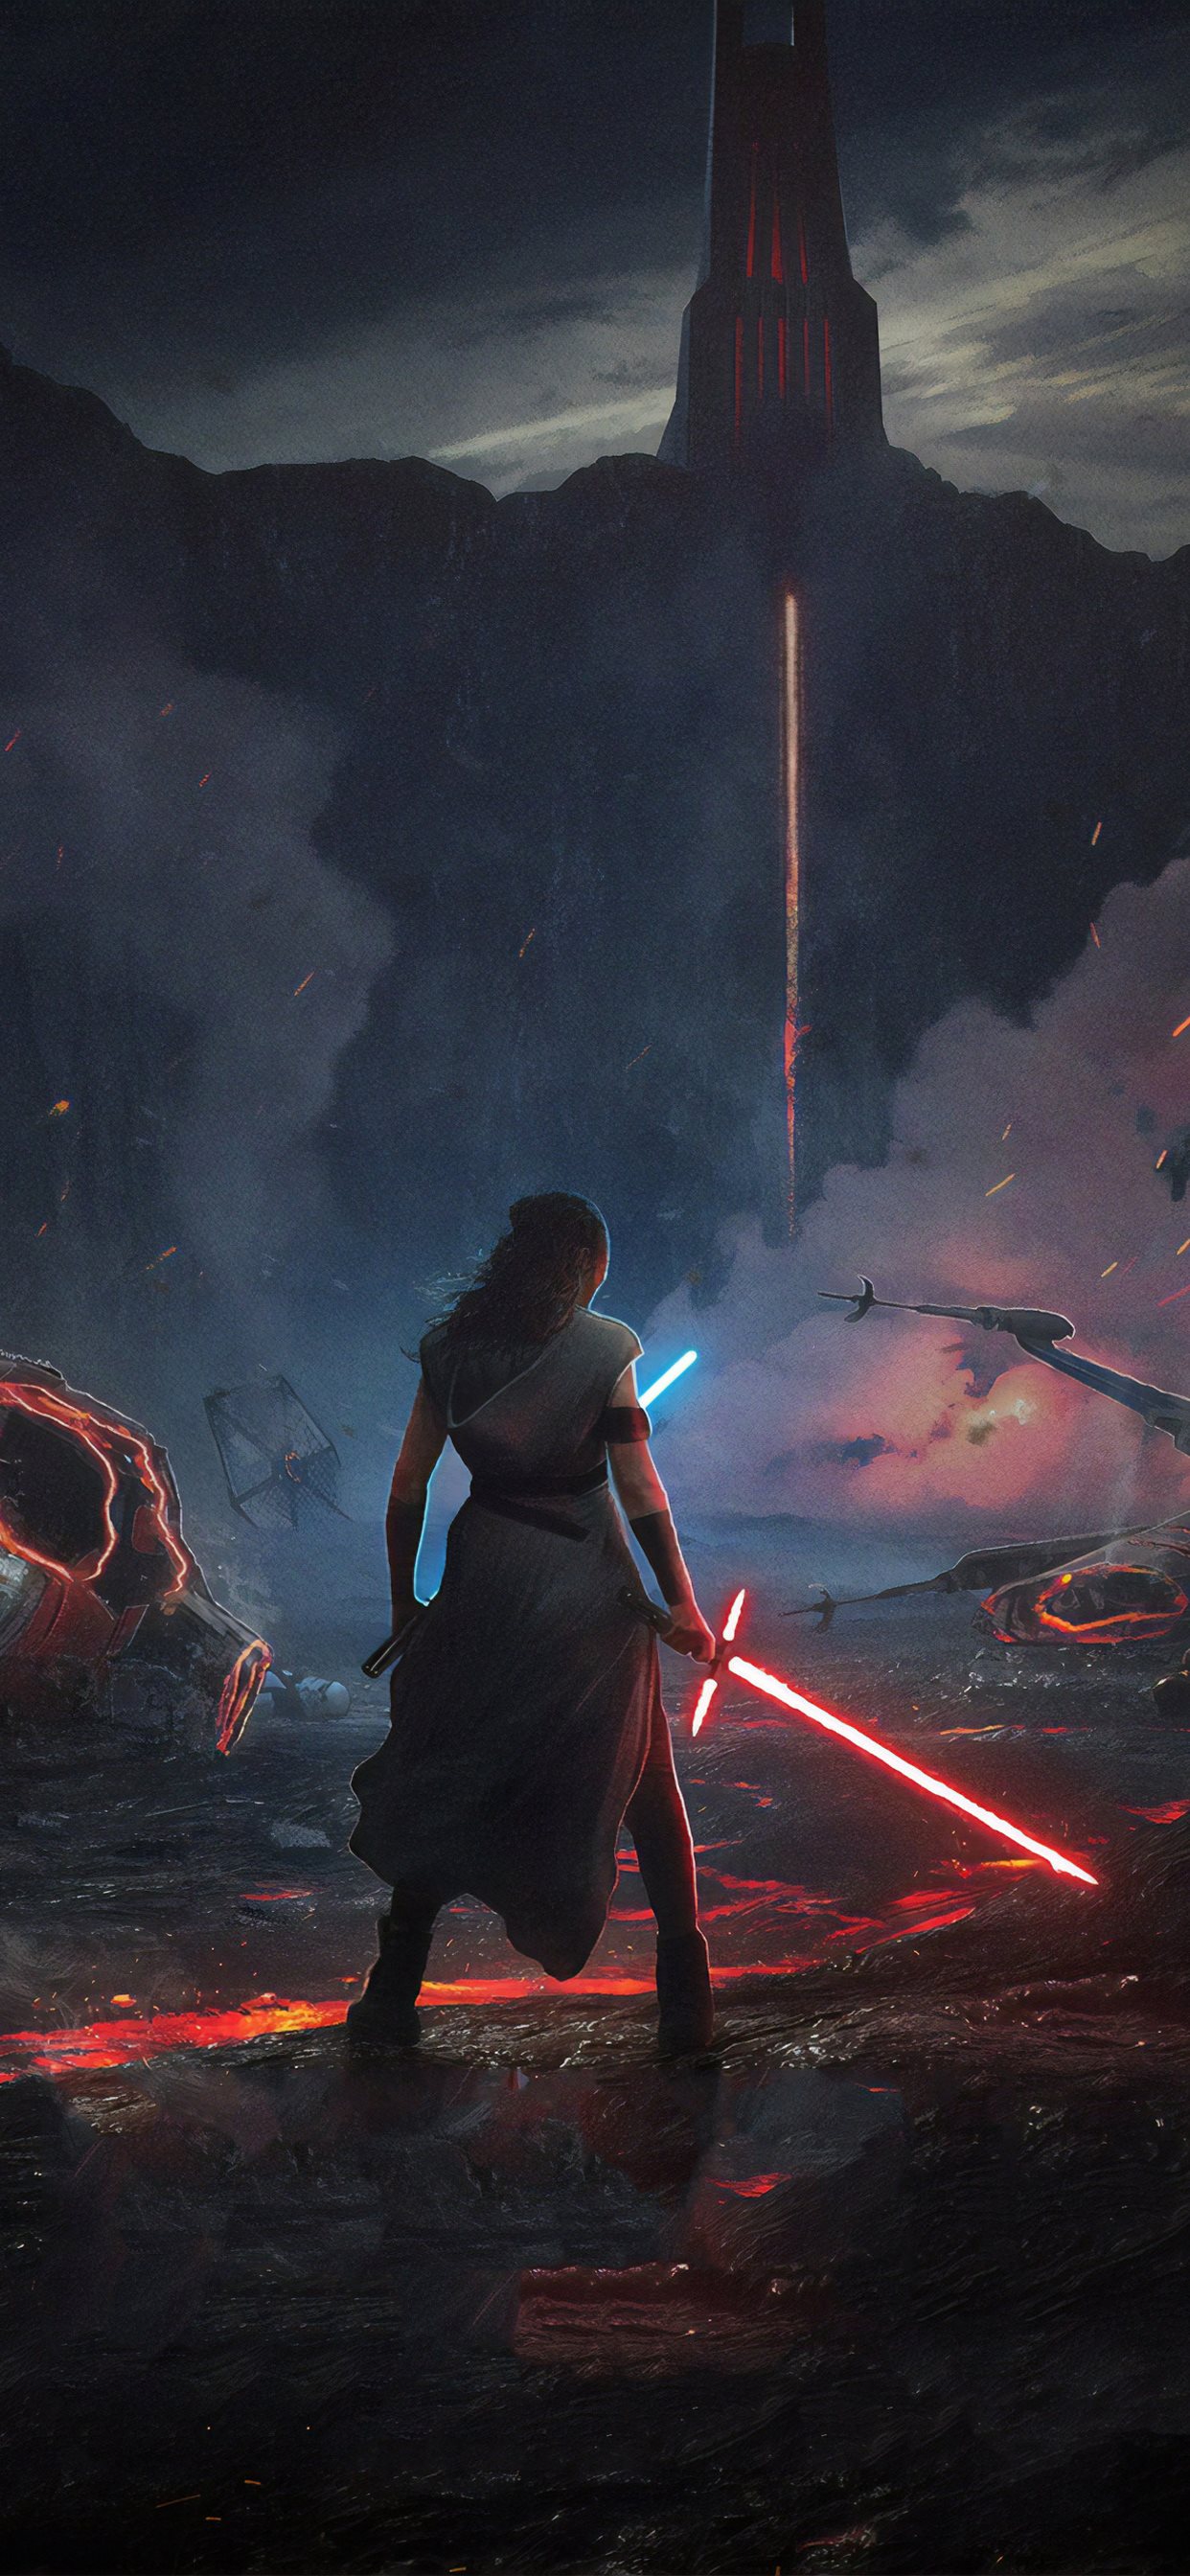 rey star wars the rise of skywalker 2019 new iPhone X Wallpaper Free Download